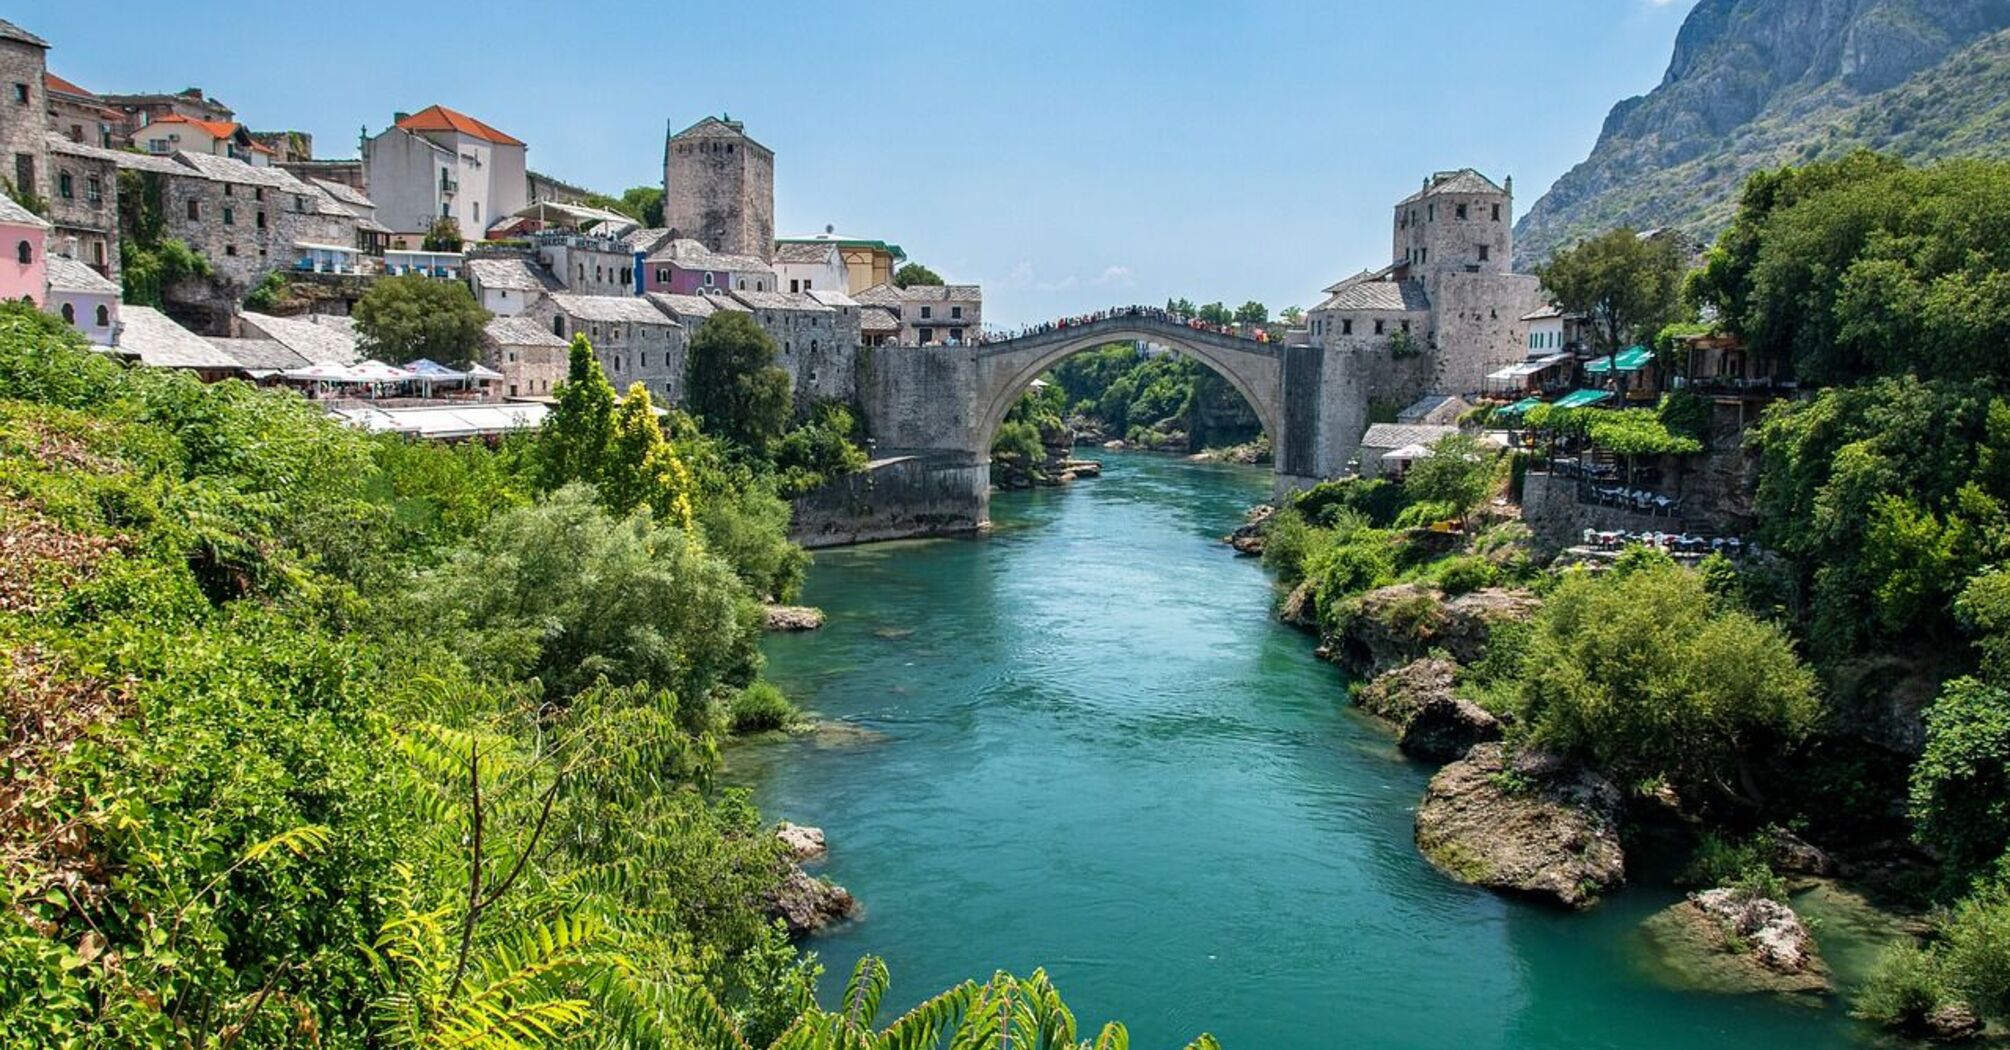 Don't open windows or ask about ethnicity: avoid these mistakes when traveling to Bosnia and Herzegovina